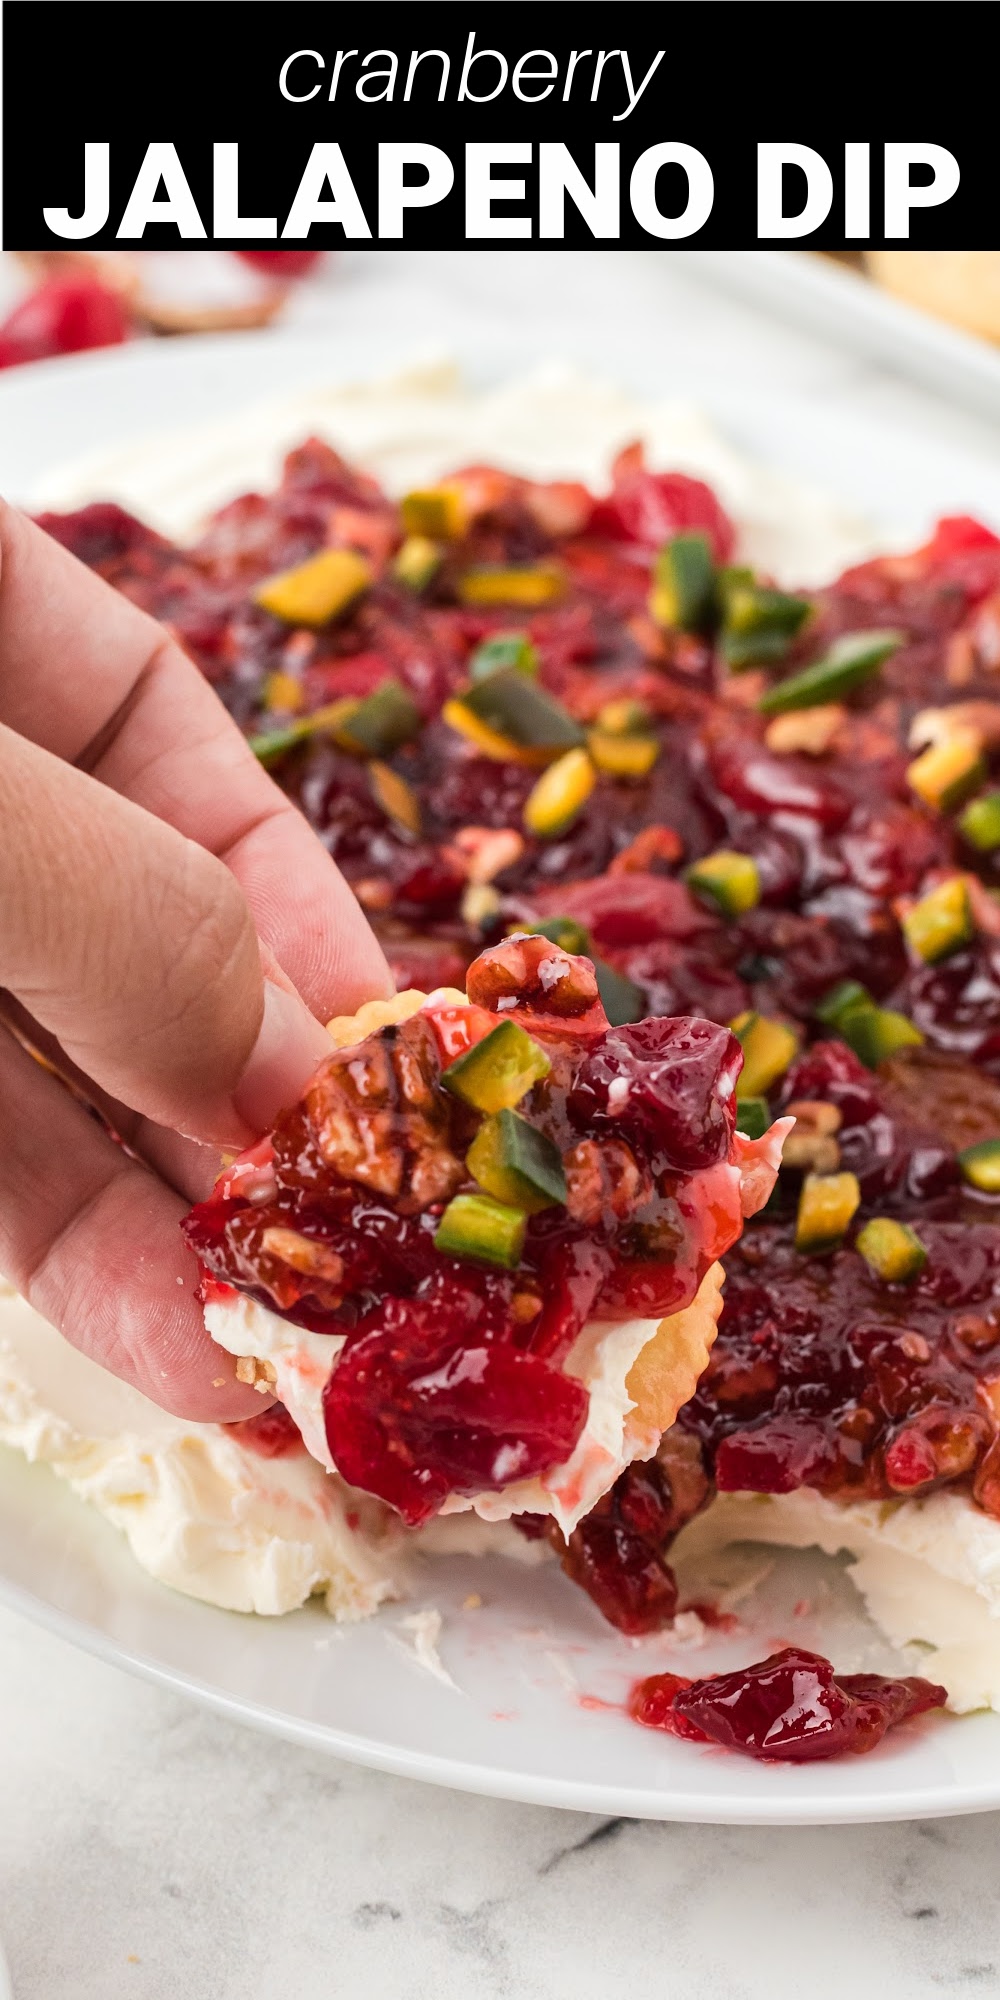 Cranberry Jalapeno Dip is a delicious seasonal dip that's creamy and sweet with a little jalapeno kick. It's perfect for holiday gatherings and makes a beautiful appetizer before any meal.